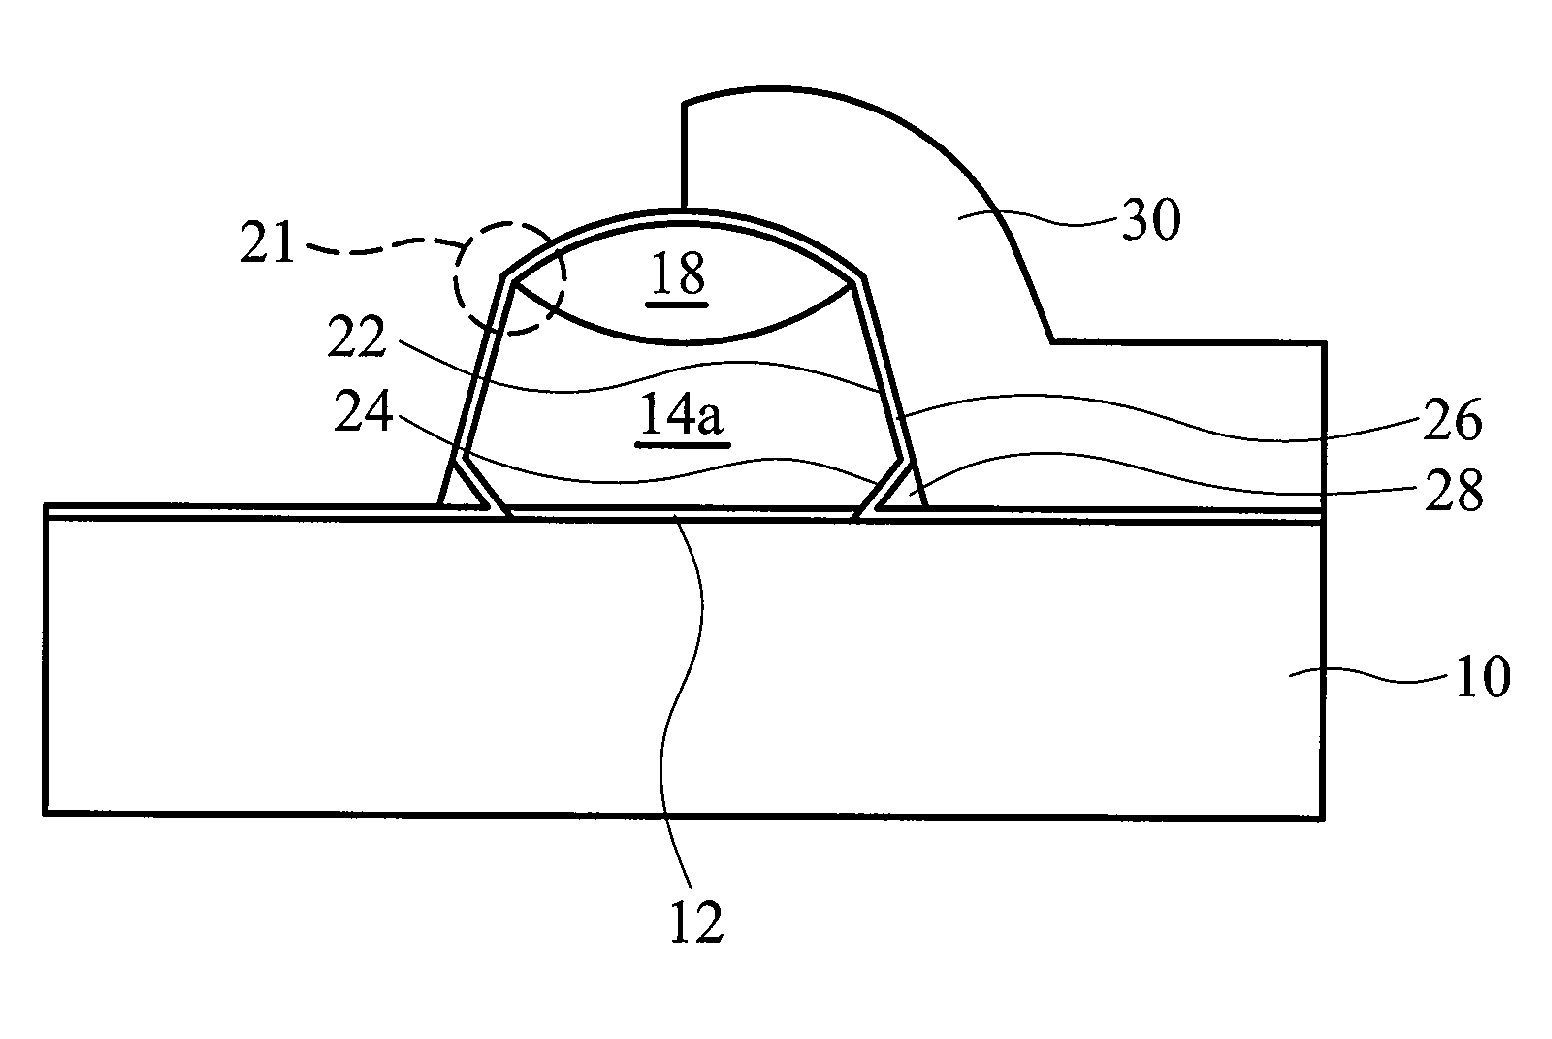 Floating gate with unique profile by means of undercutting for split-gate flash memory device